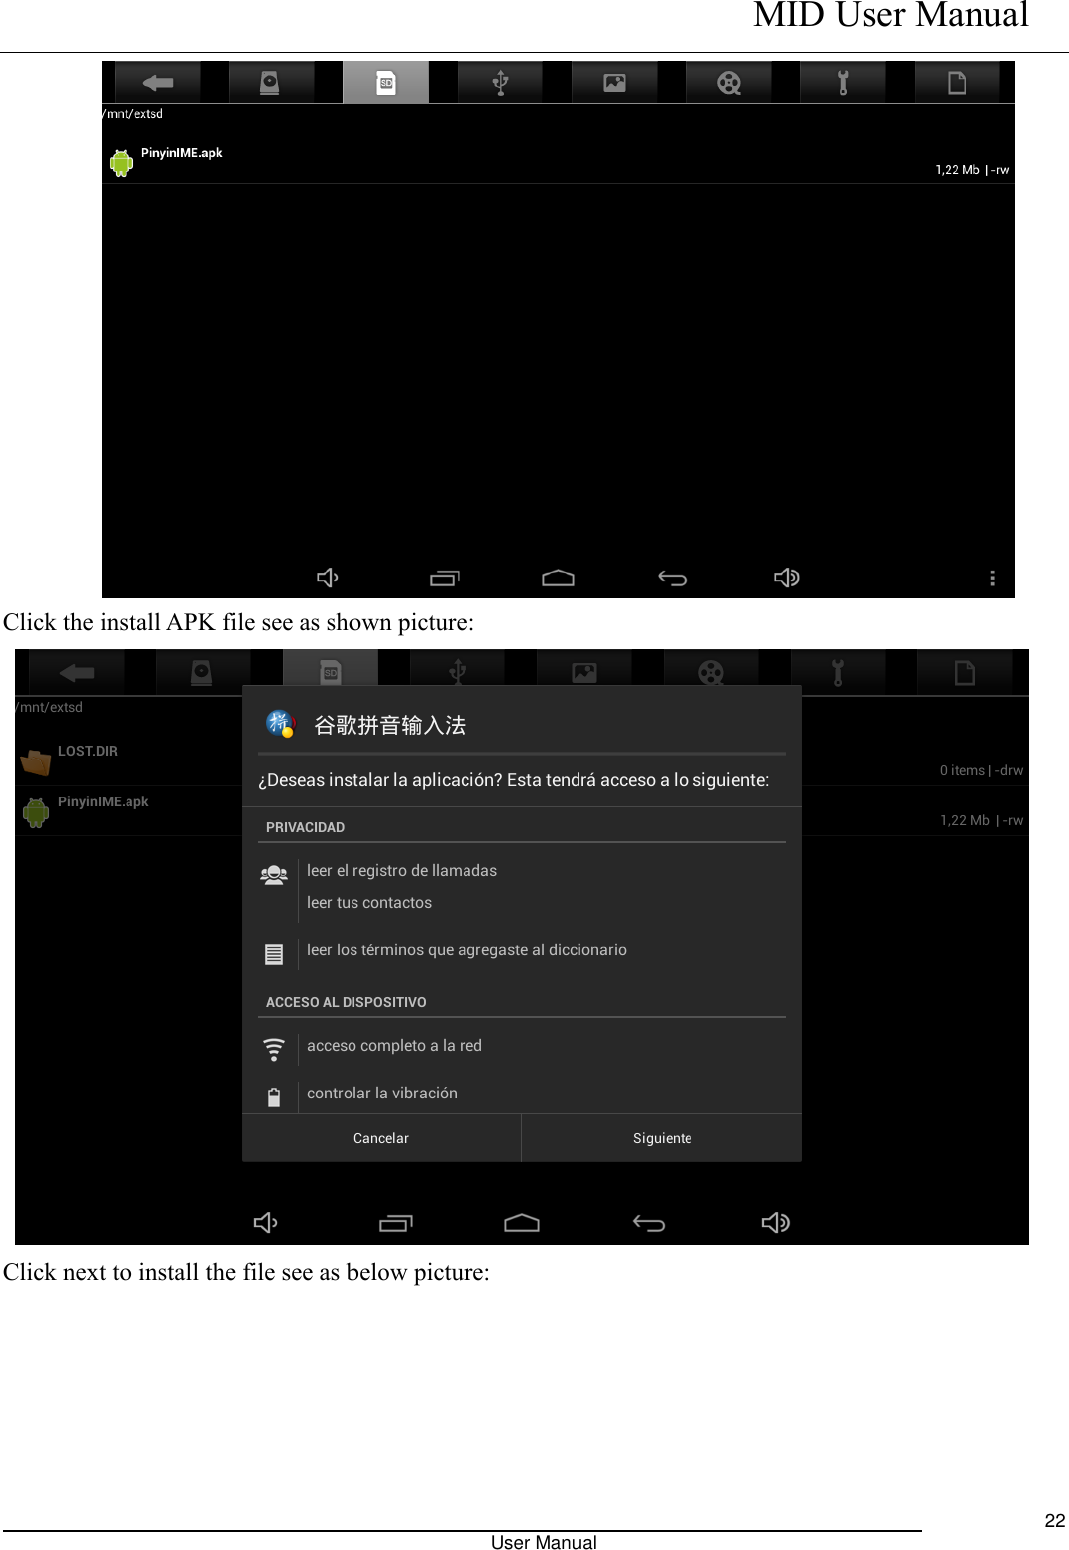    MID User Manual                                                                                                            User Manual     22         Click the install APK file see as shown picture:    Click next to install the file see as below picture: 